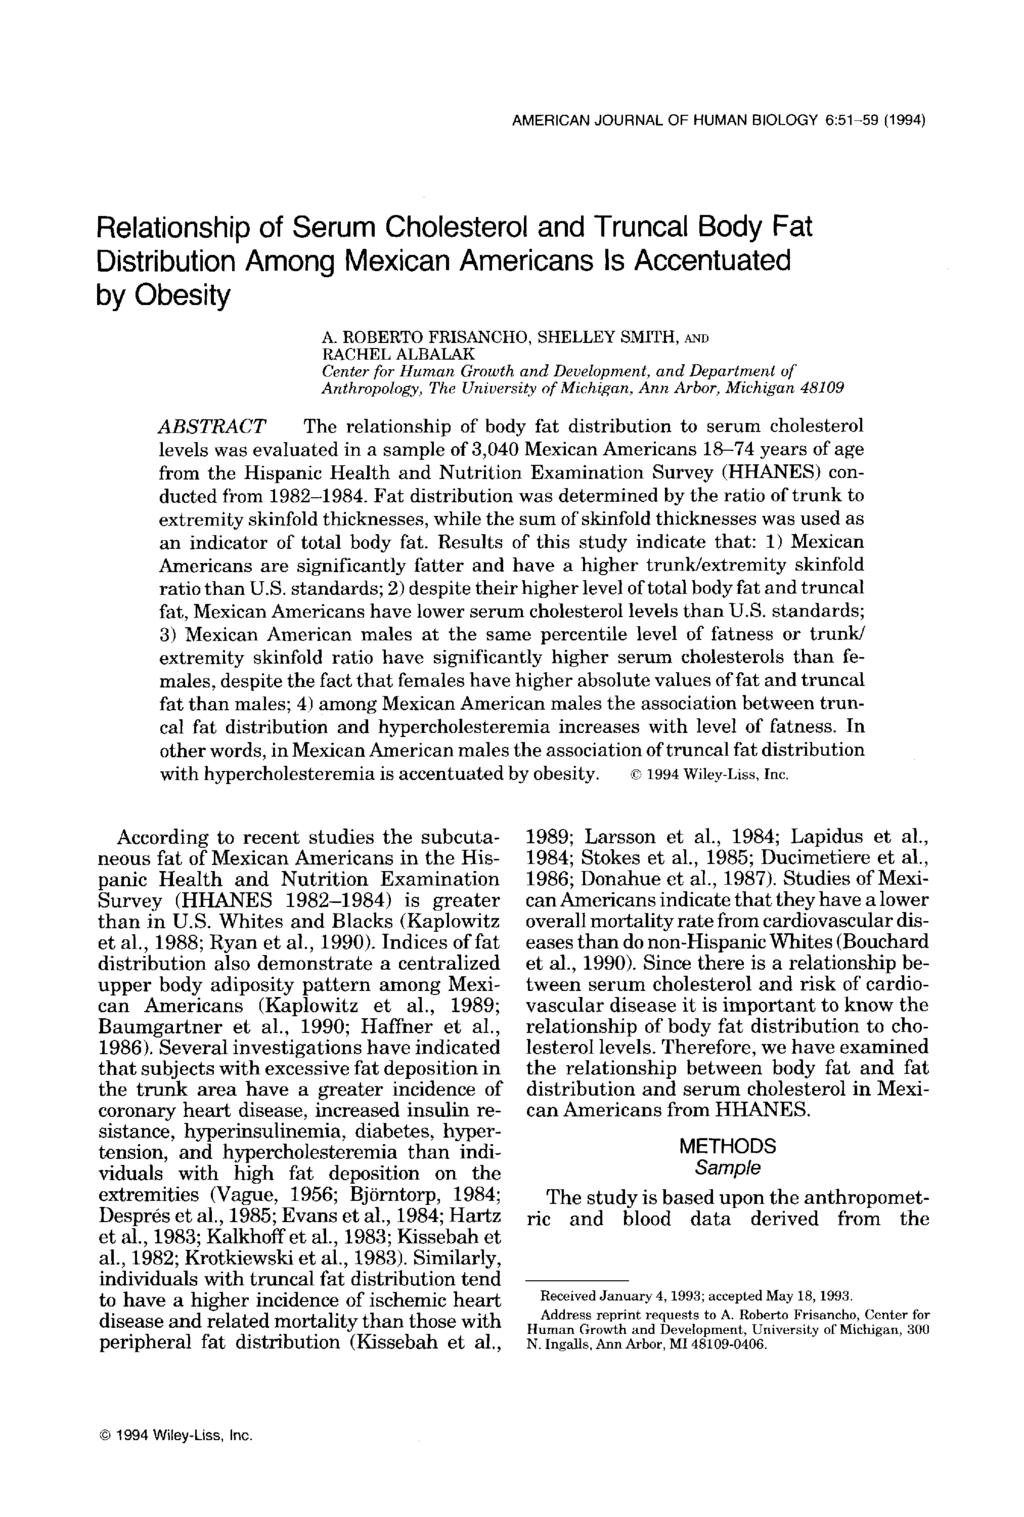 AMERCAN JOURNAL OF HUMAN BOLOGY 65-59 (1994) Relationship of Serum Cholesterol and Truncal Body Fat Distribution Among Mexican Americans s Accentuated by Obesity A.